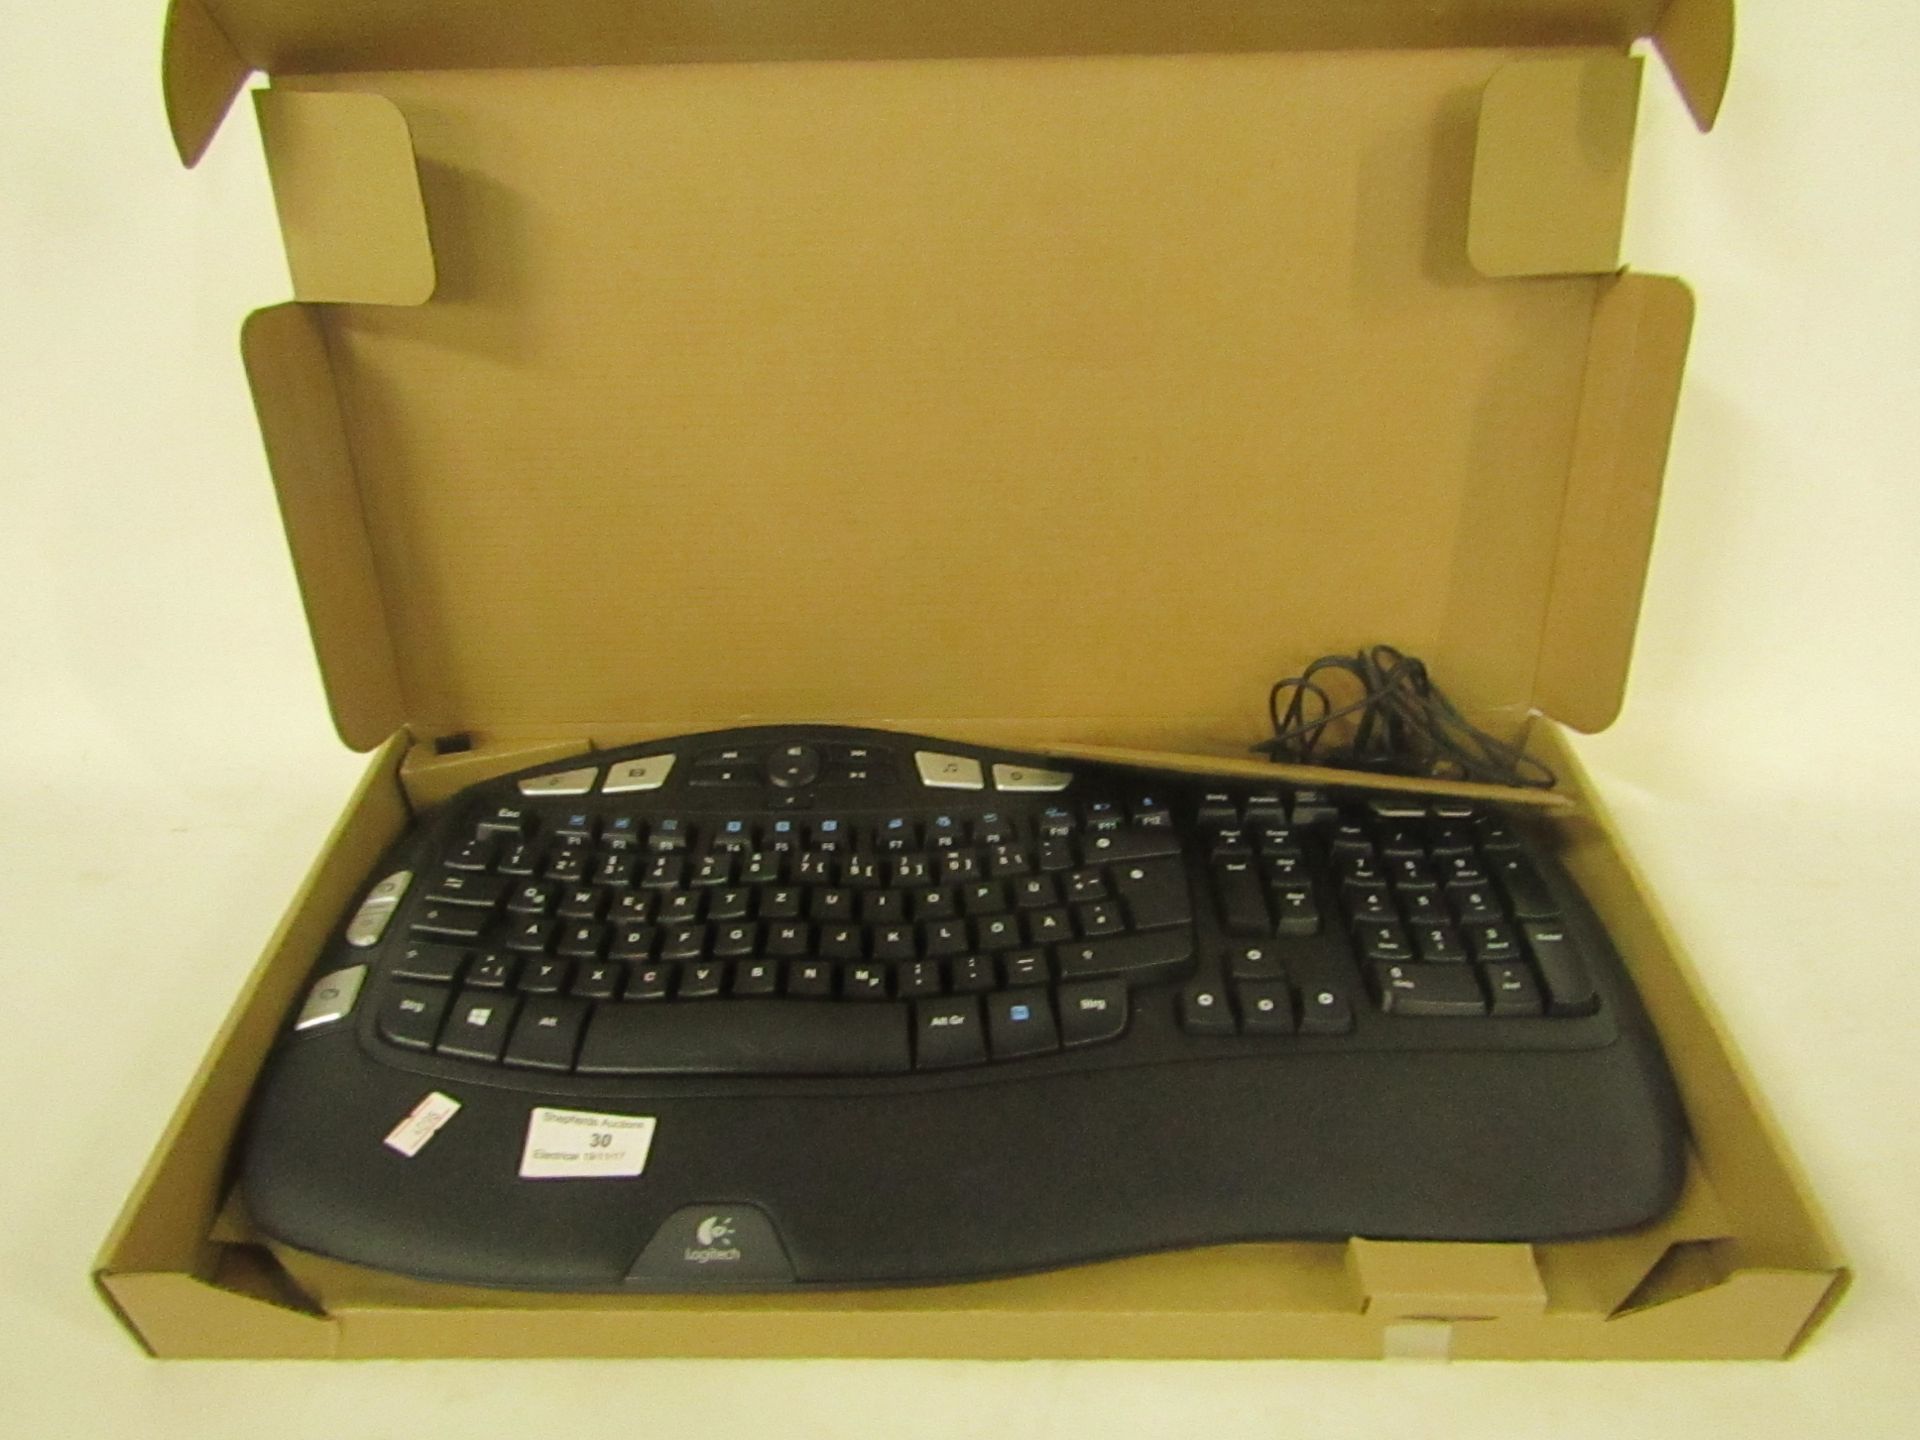 Logitech comfort keyboard, untested and boxed.